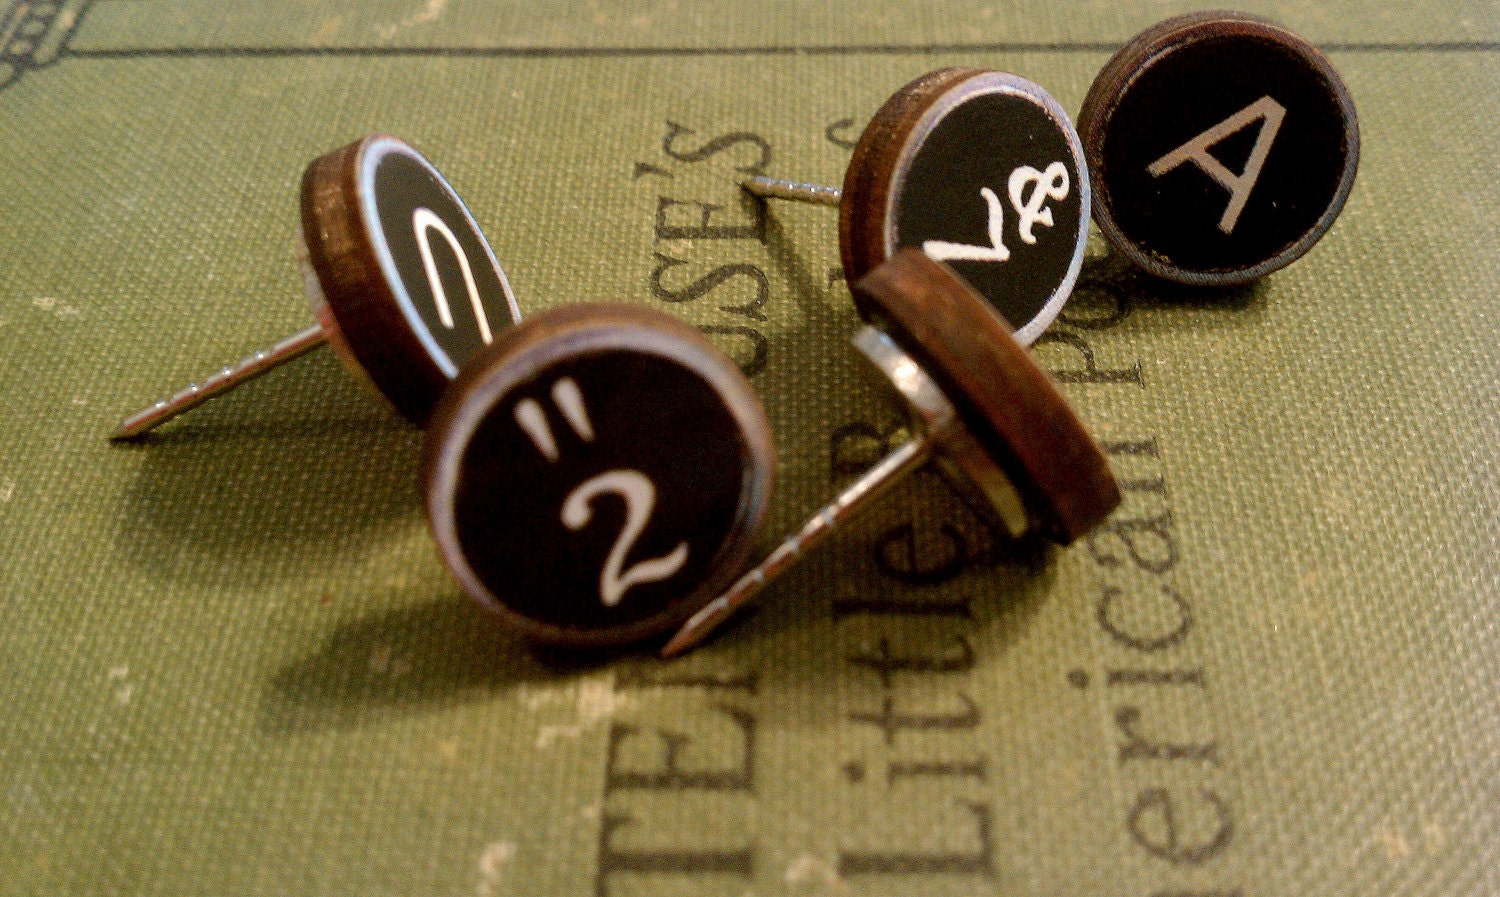 Vintage Style Typewriter Key Push Pins Magnets - Qty 5 - Old School Retro Industrial Office College